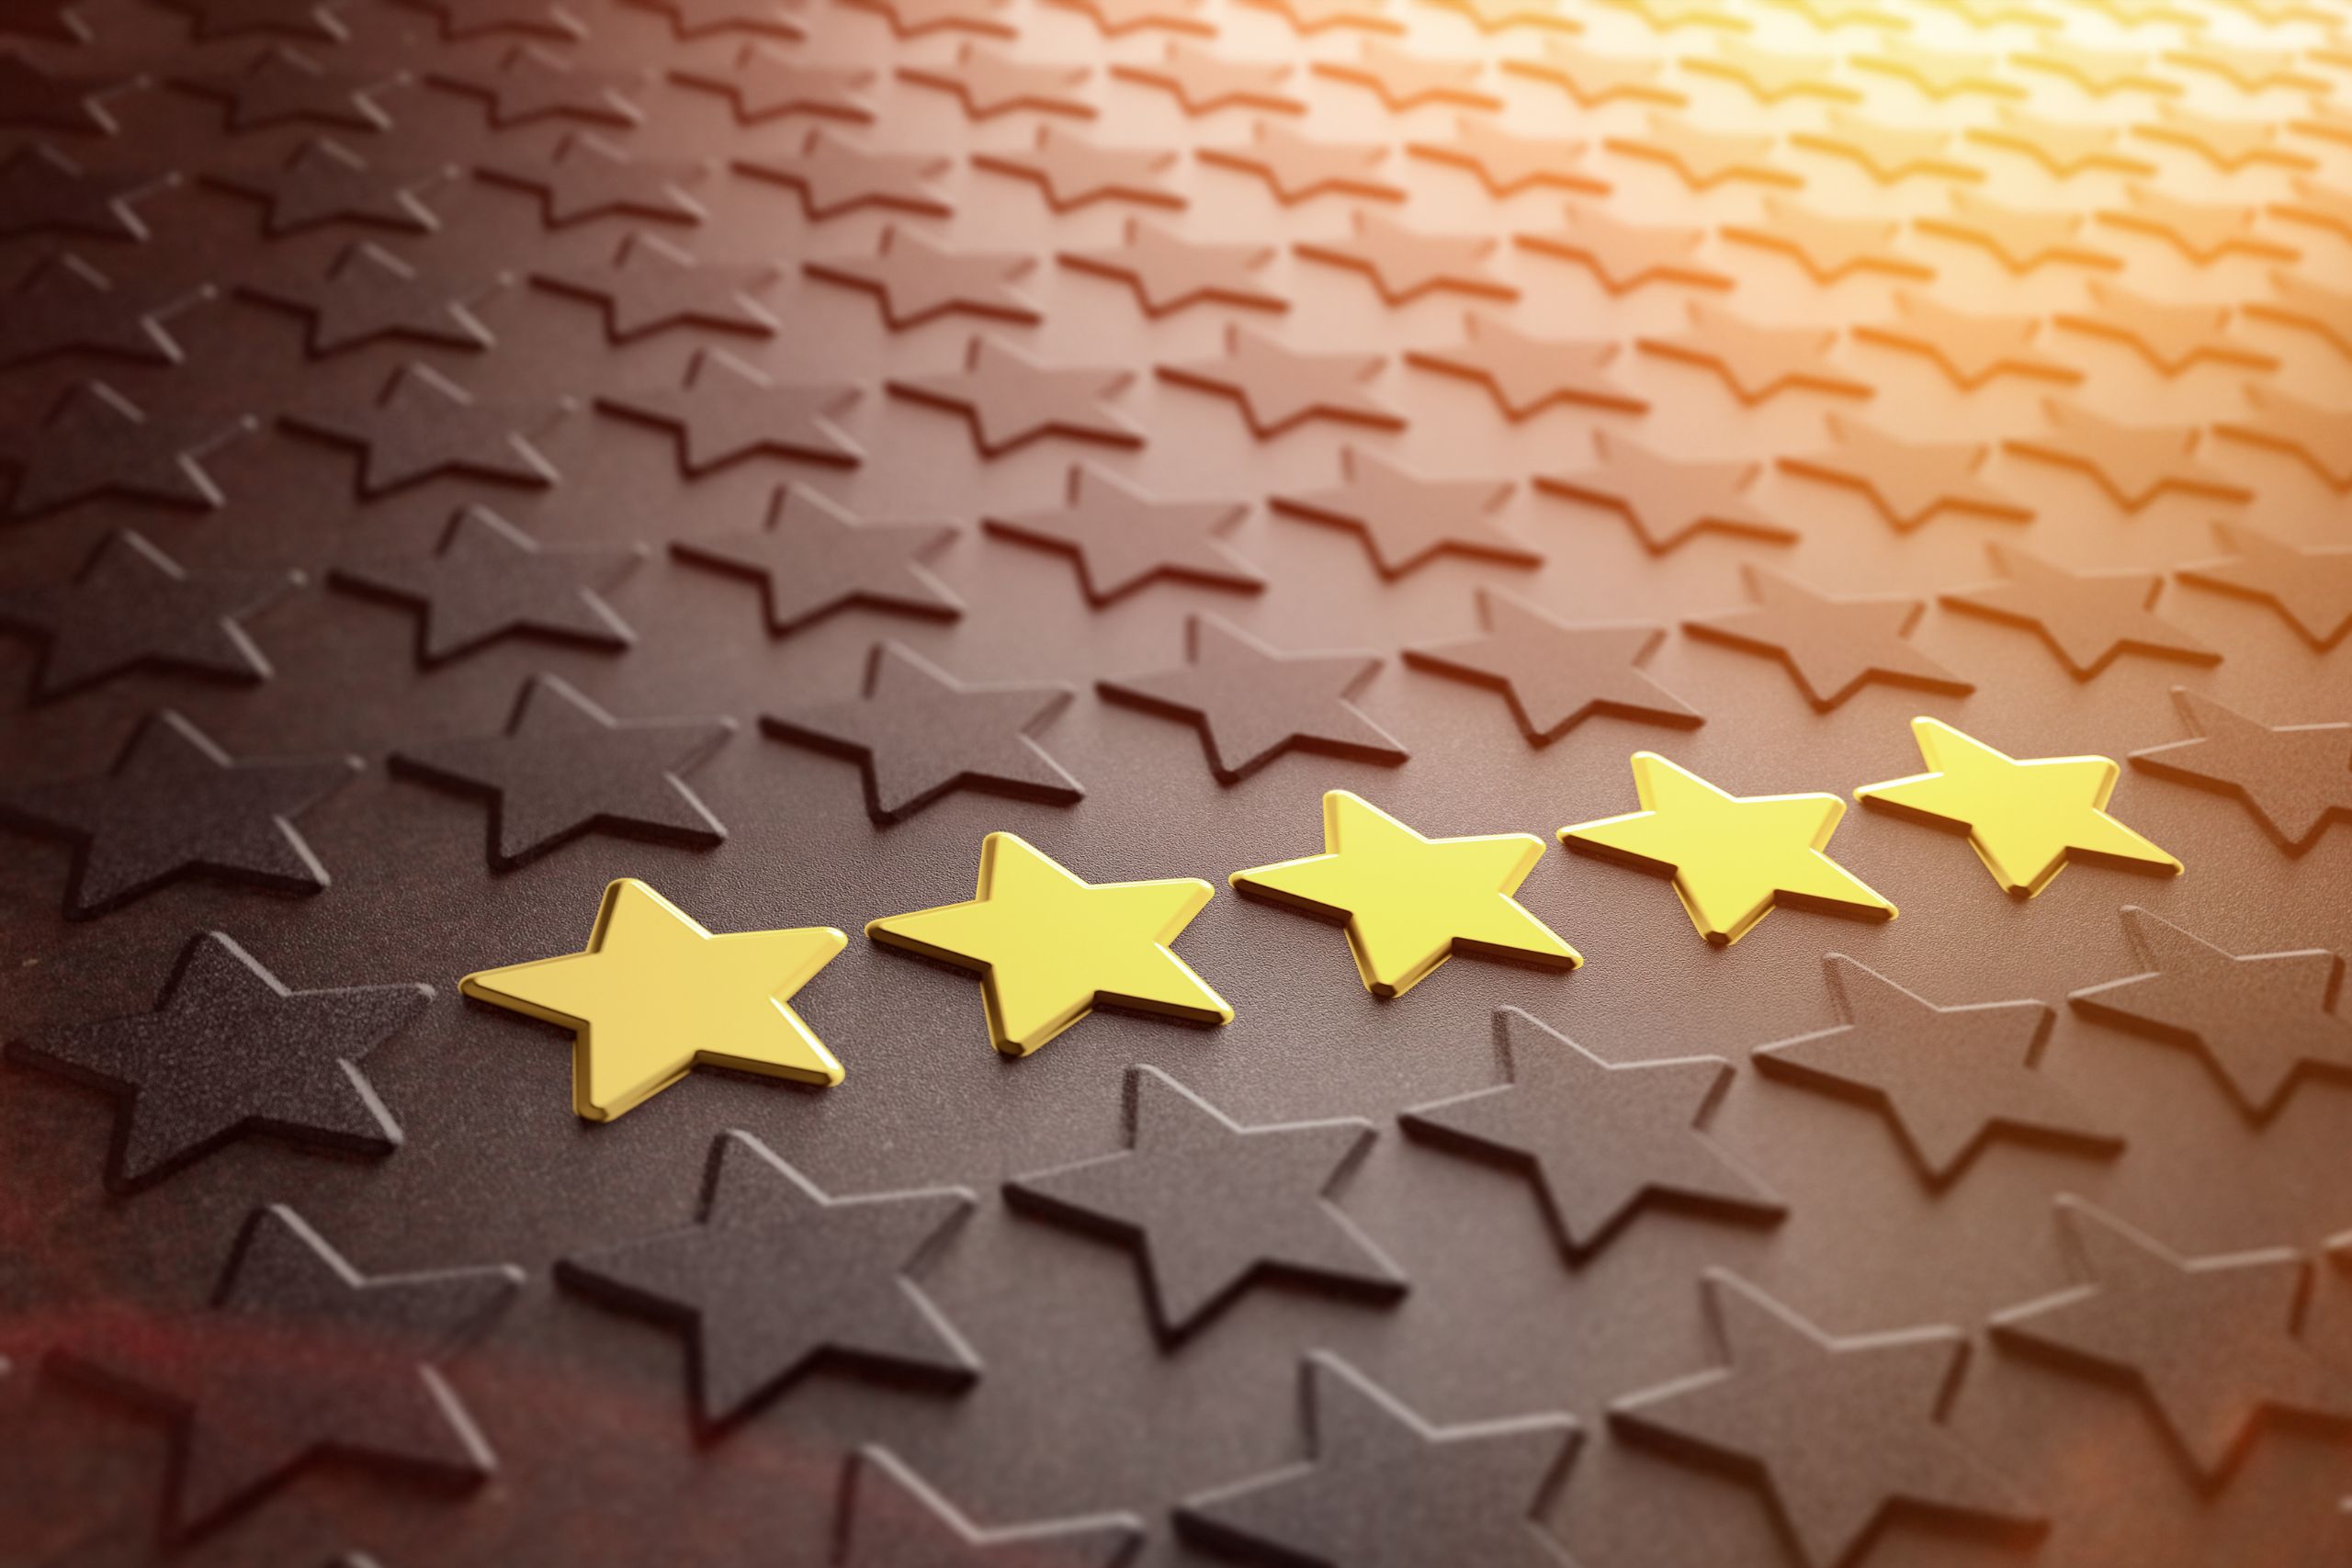 5 stars representing the security score on a third party vendor risk management